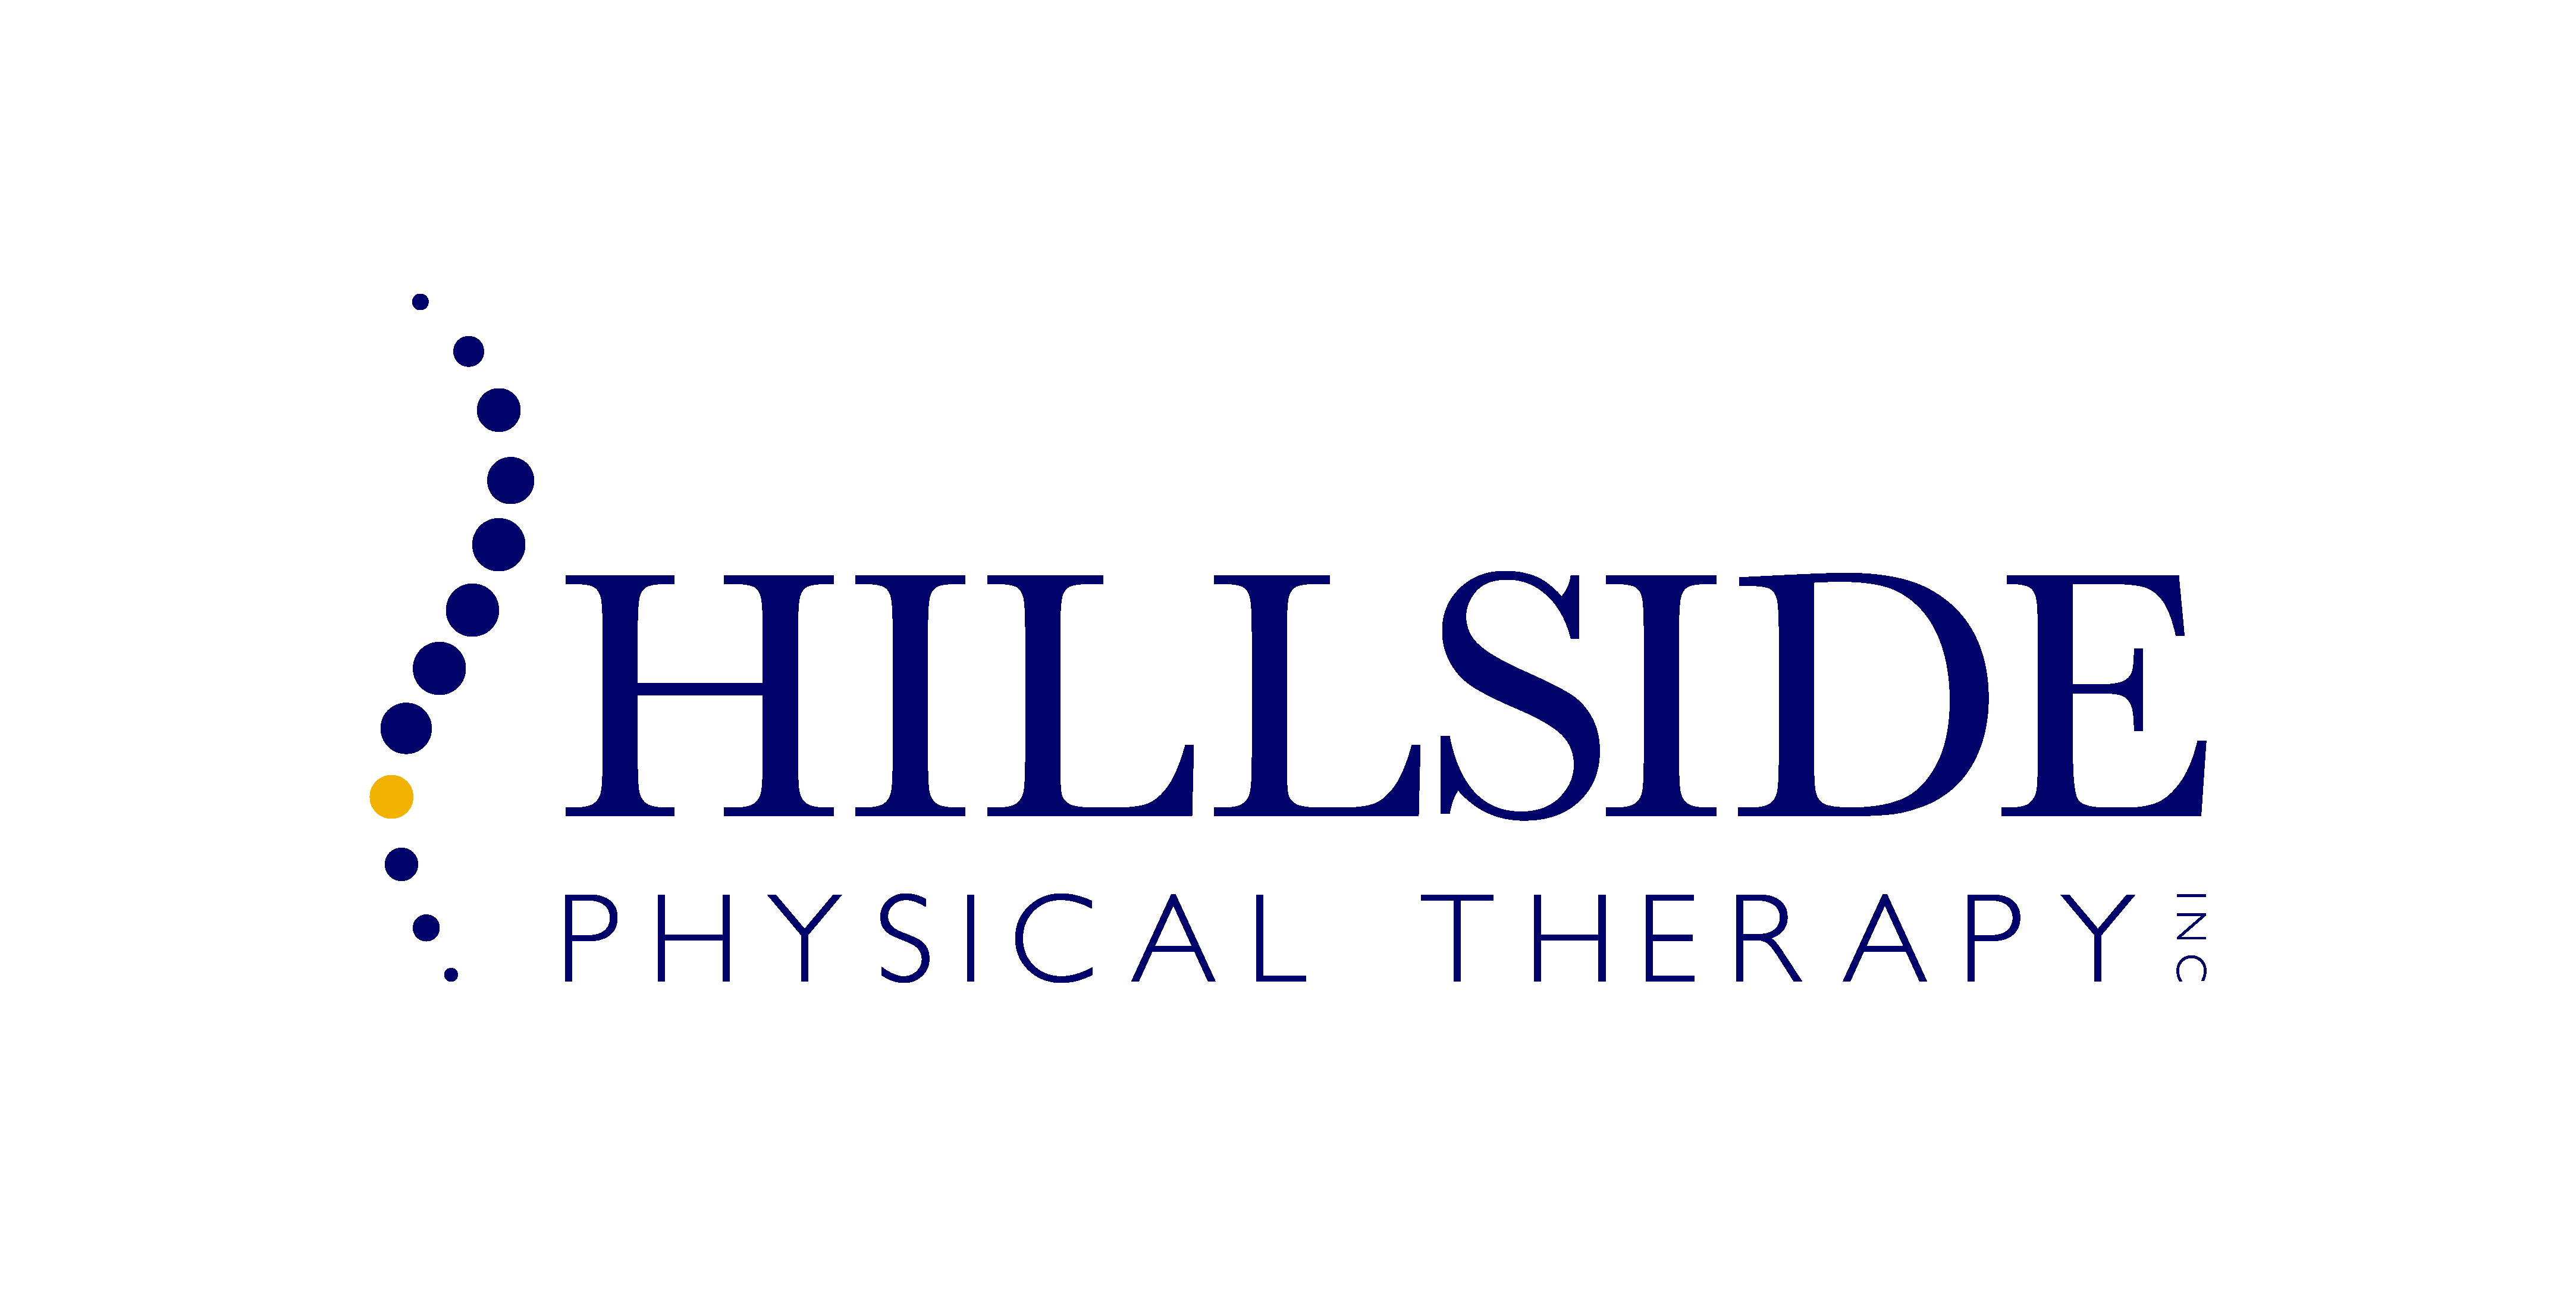 Hillside Physical Therapy, Inc